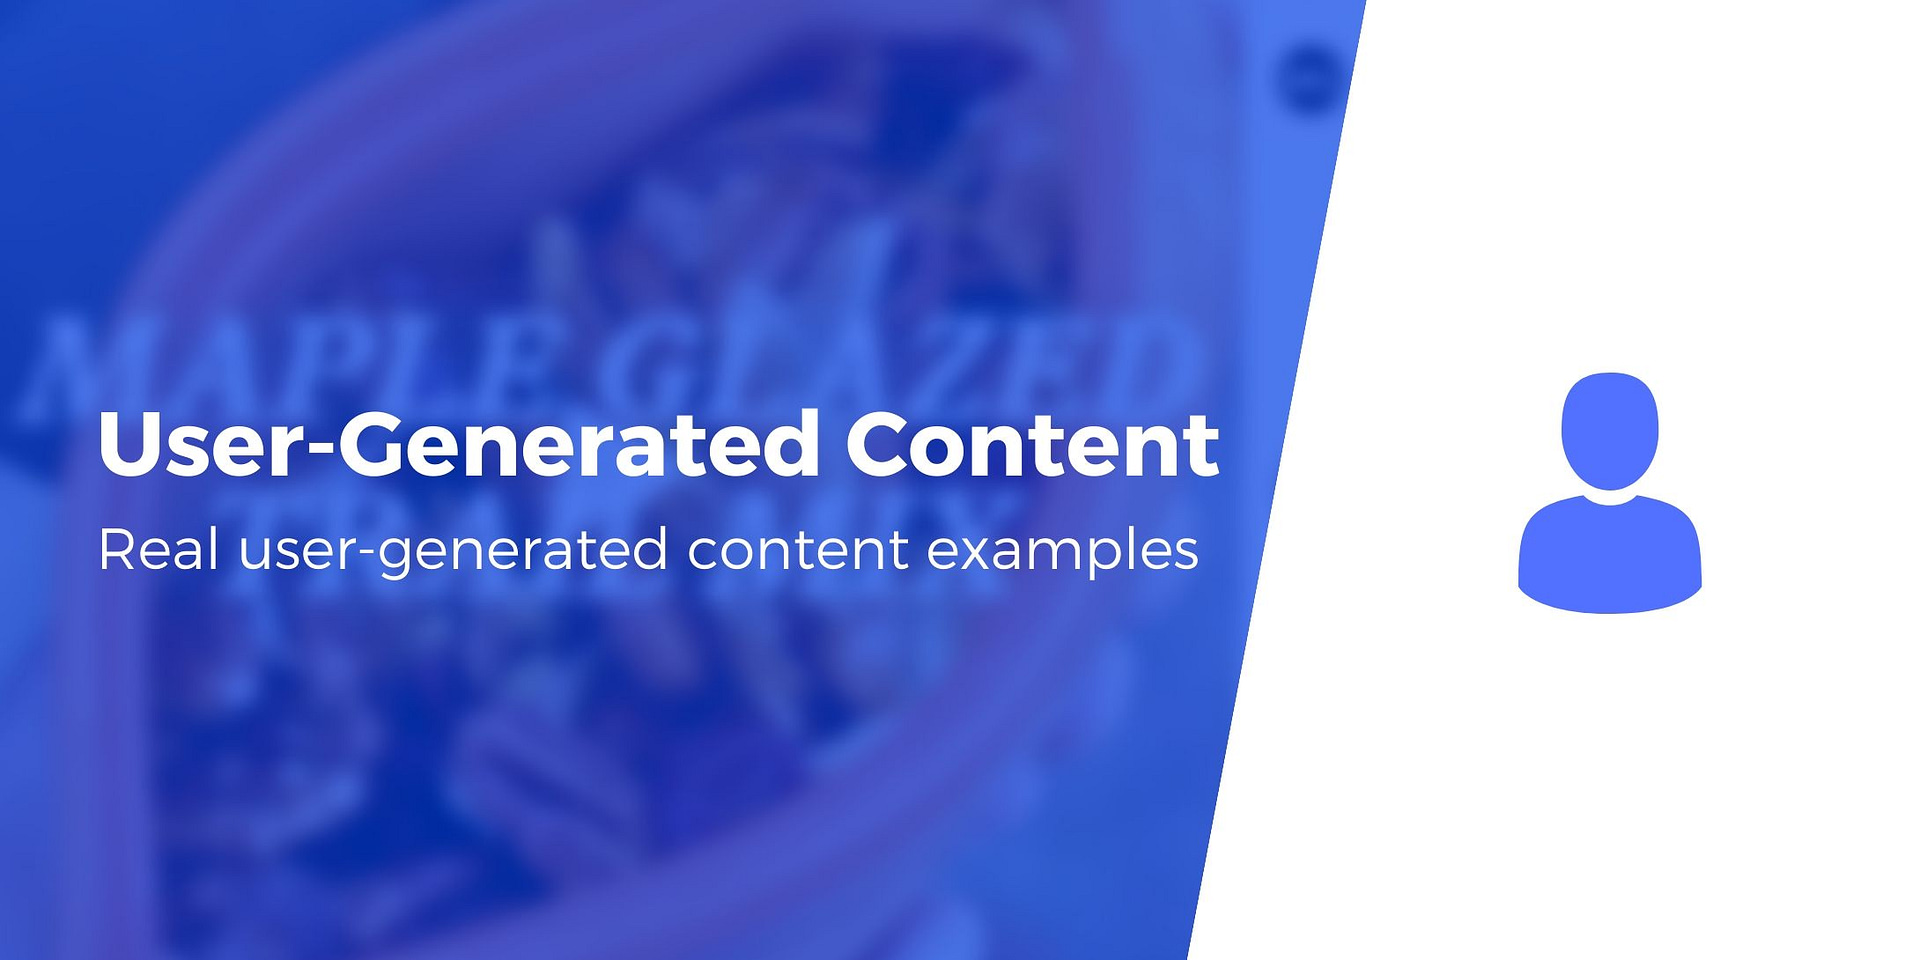 10 user-generated content examples and why they work